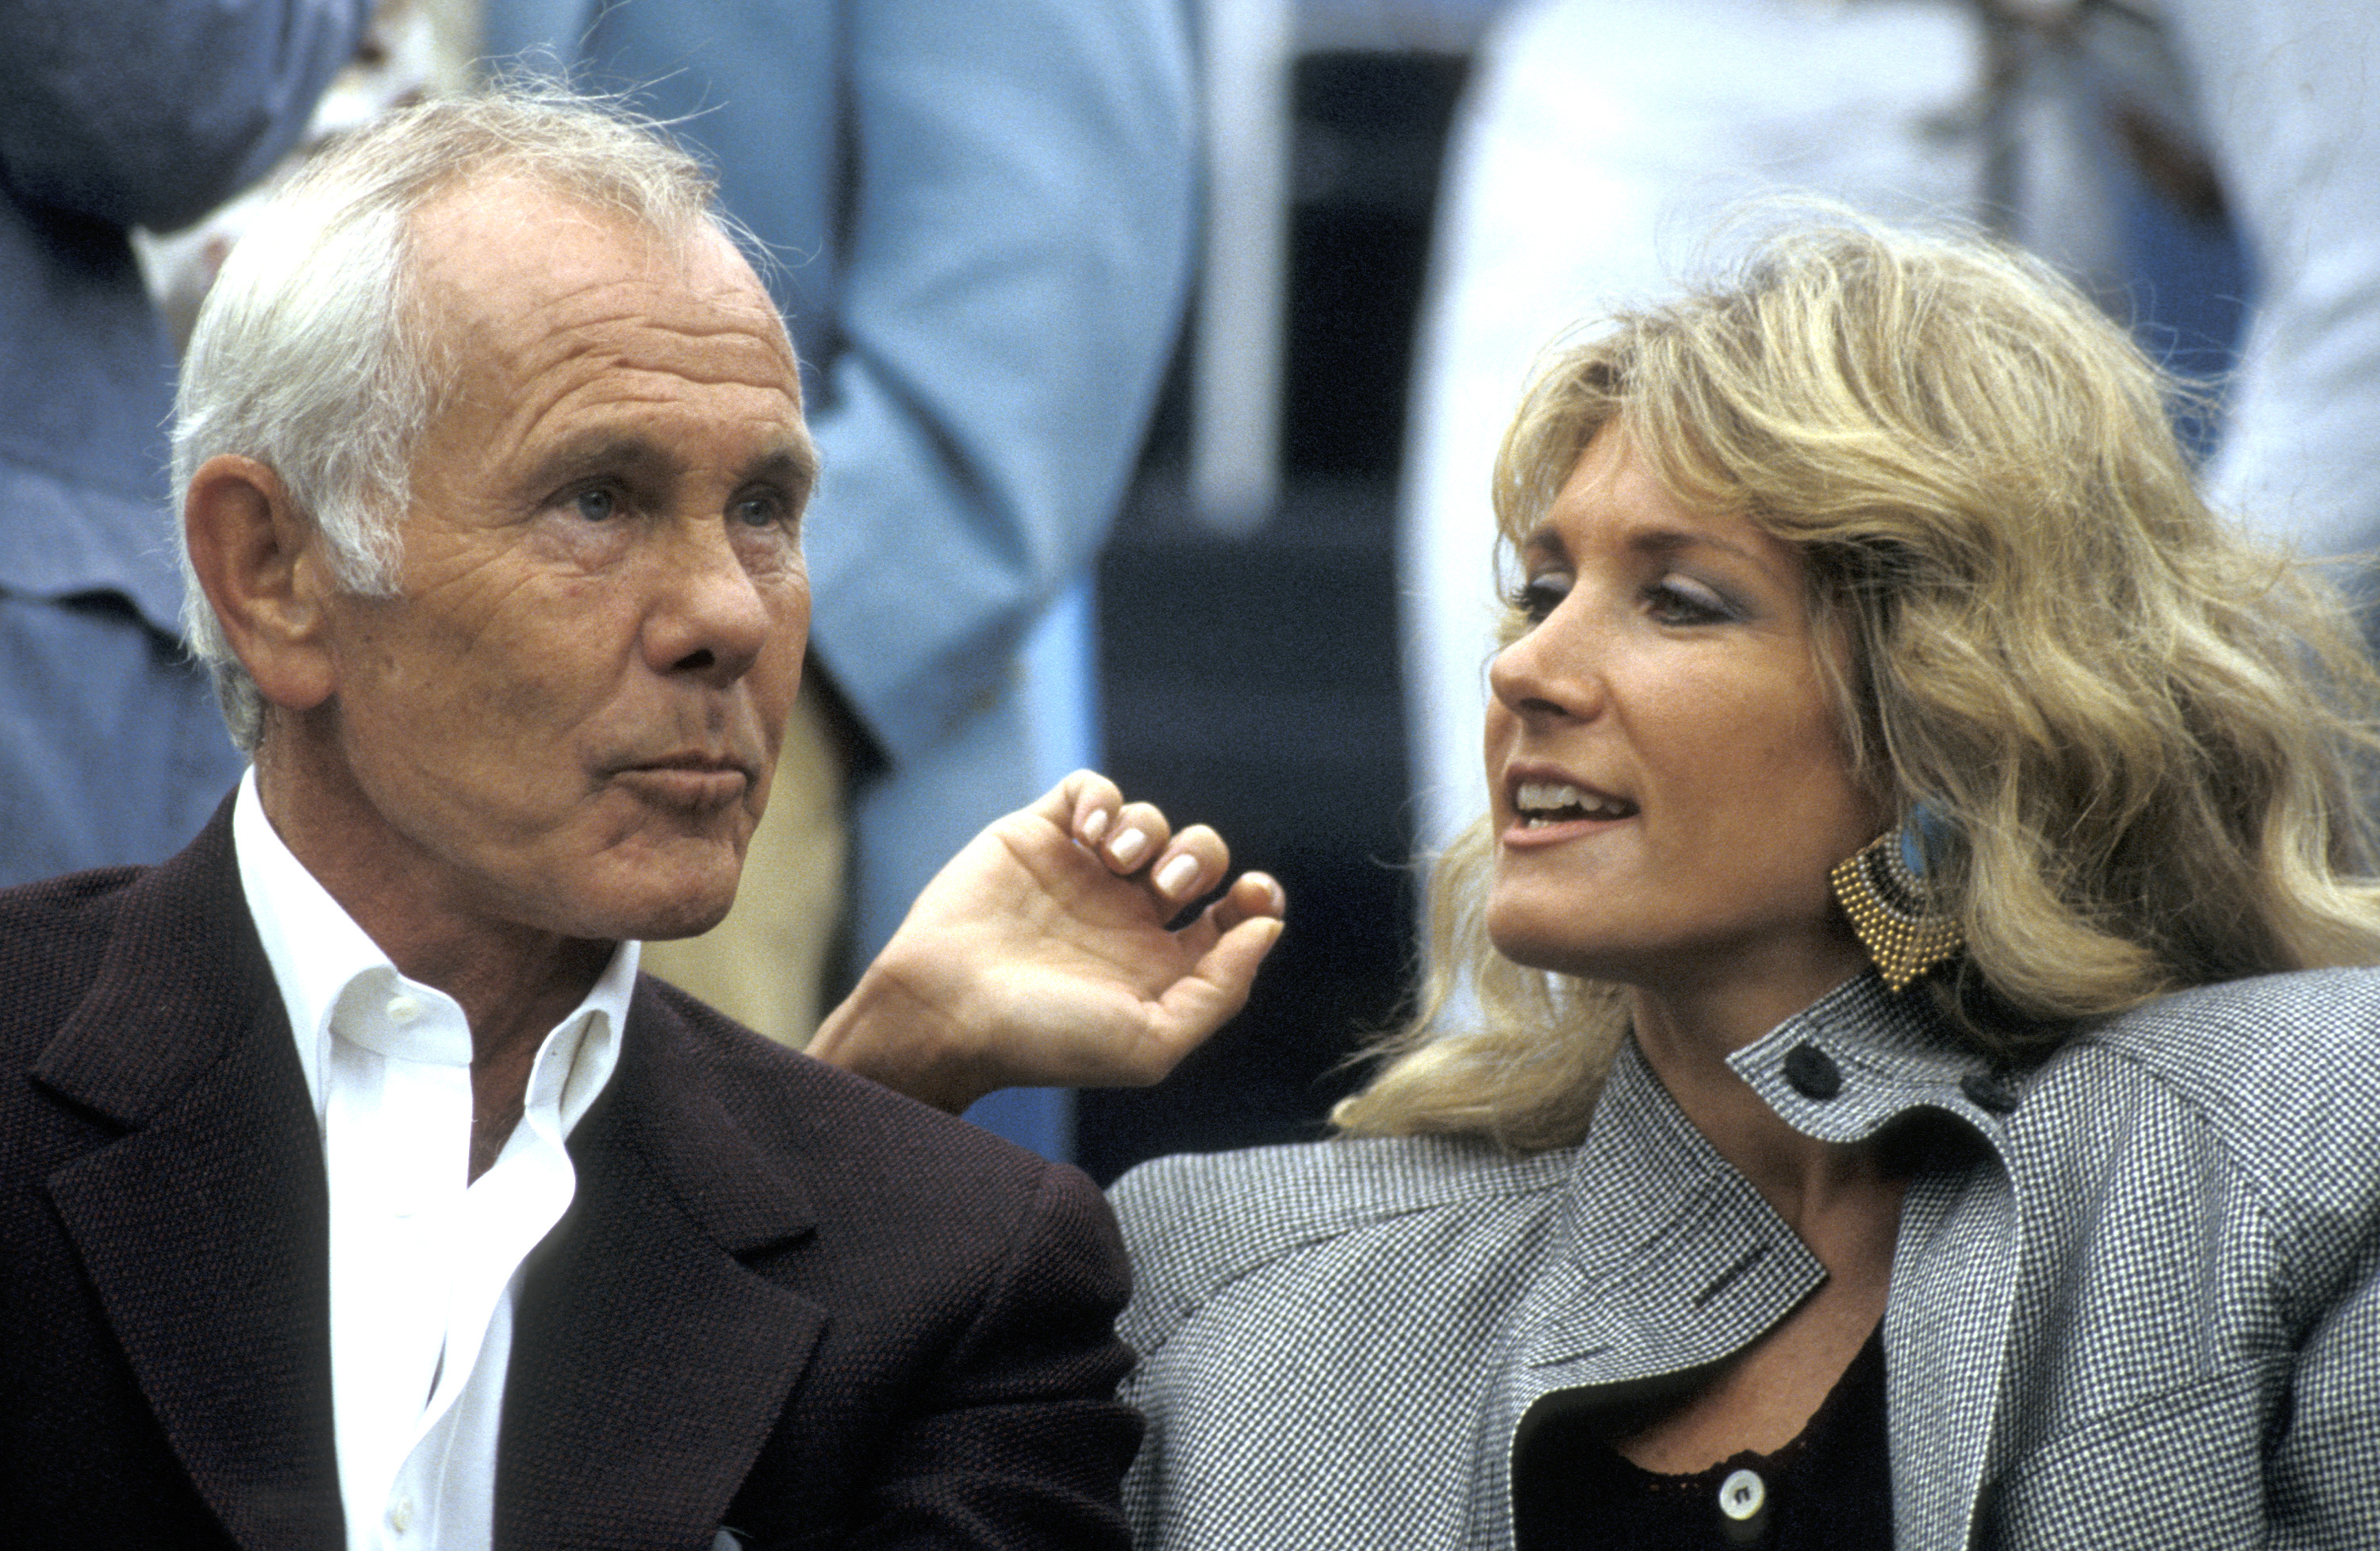 Johnny Carson and Alexis Maas during the U.S. Tennis Open at Flushing Meadows Park in New York City, on September 12, 1987 | Source: Getty Images